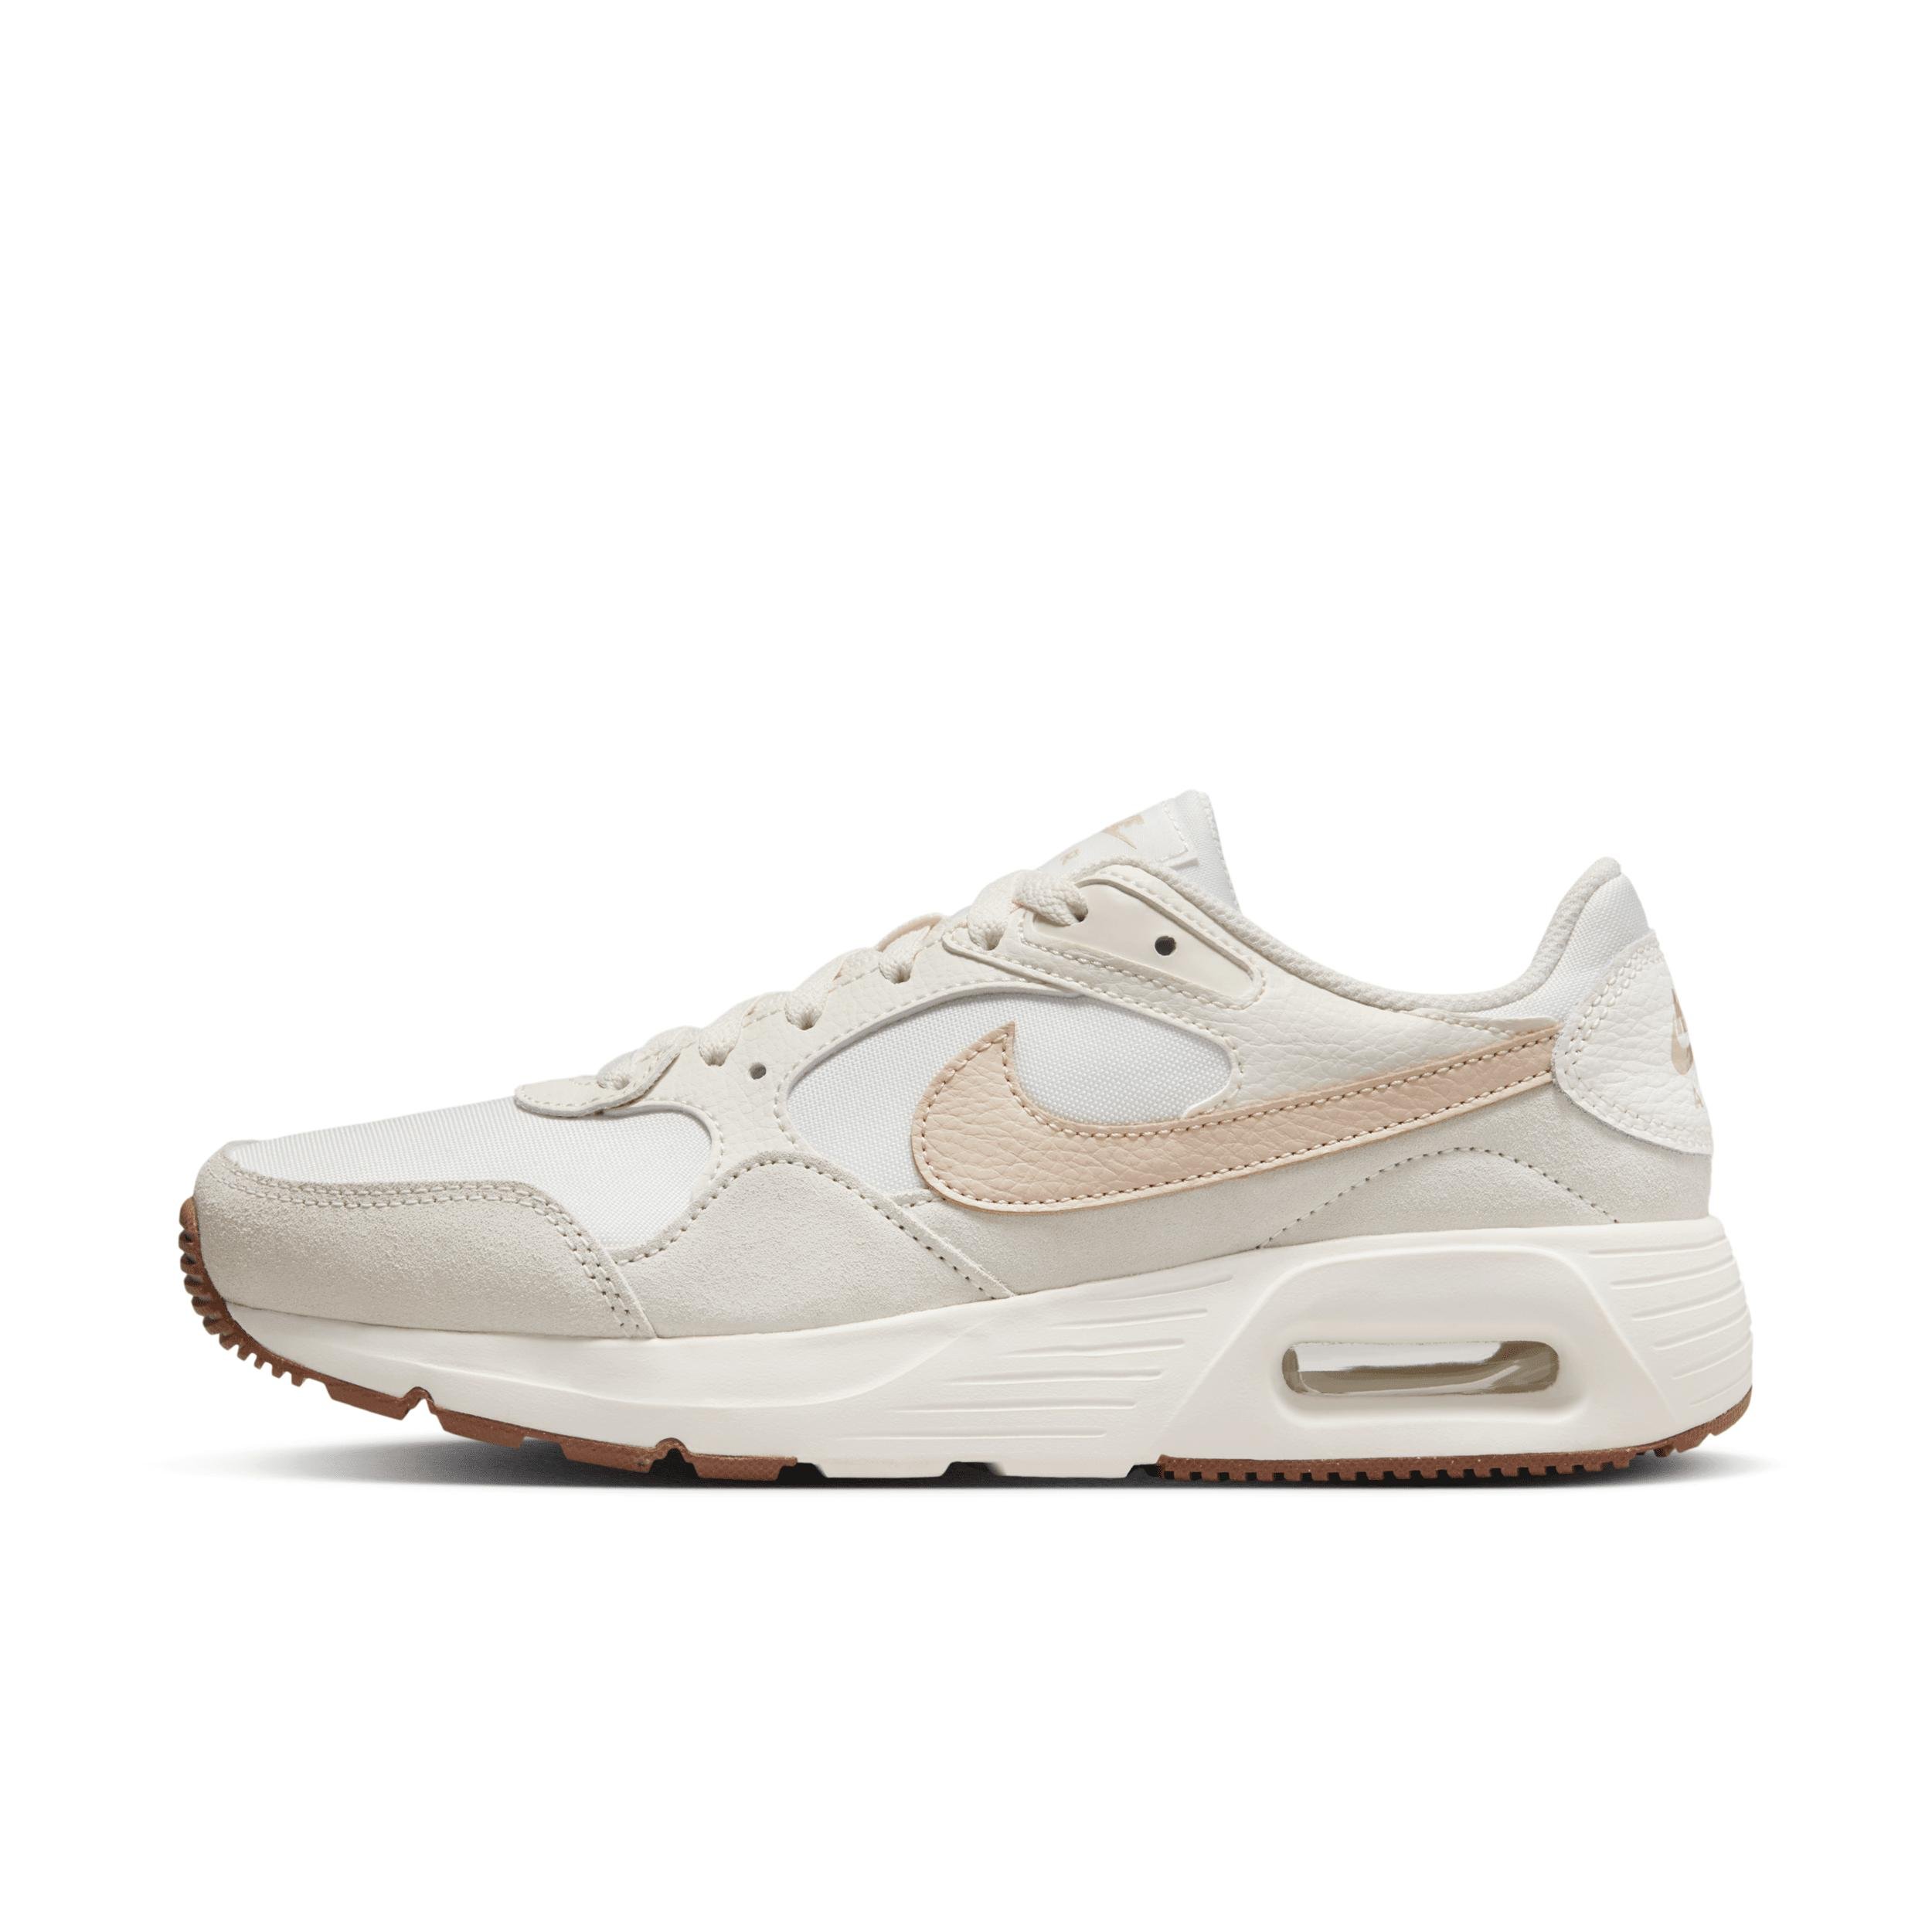 Nike Women's Air Max SC Shoes by NIKE